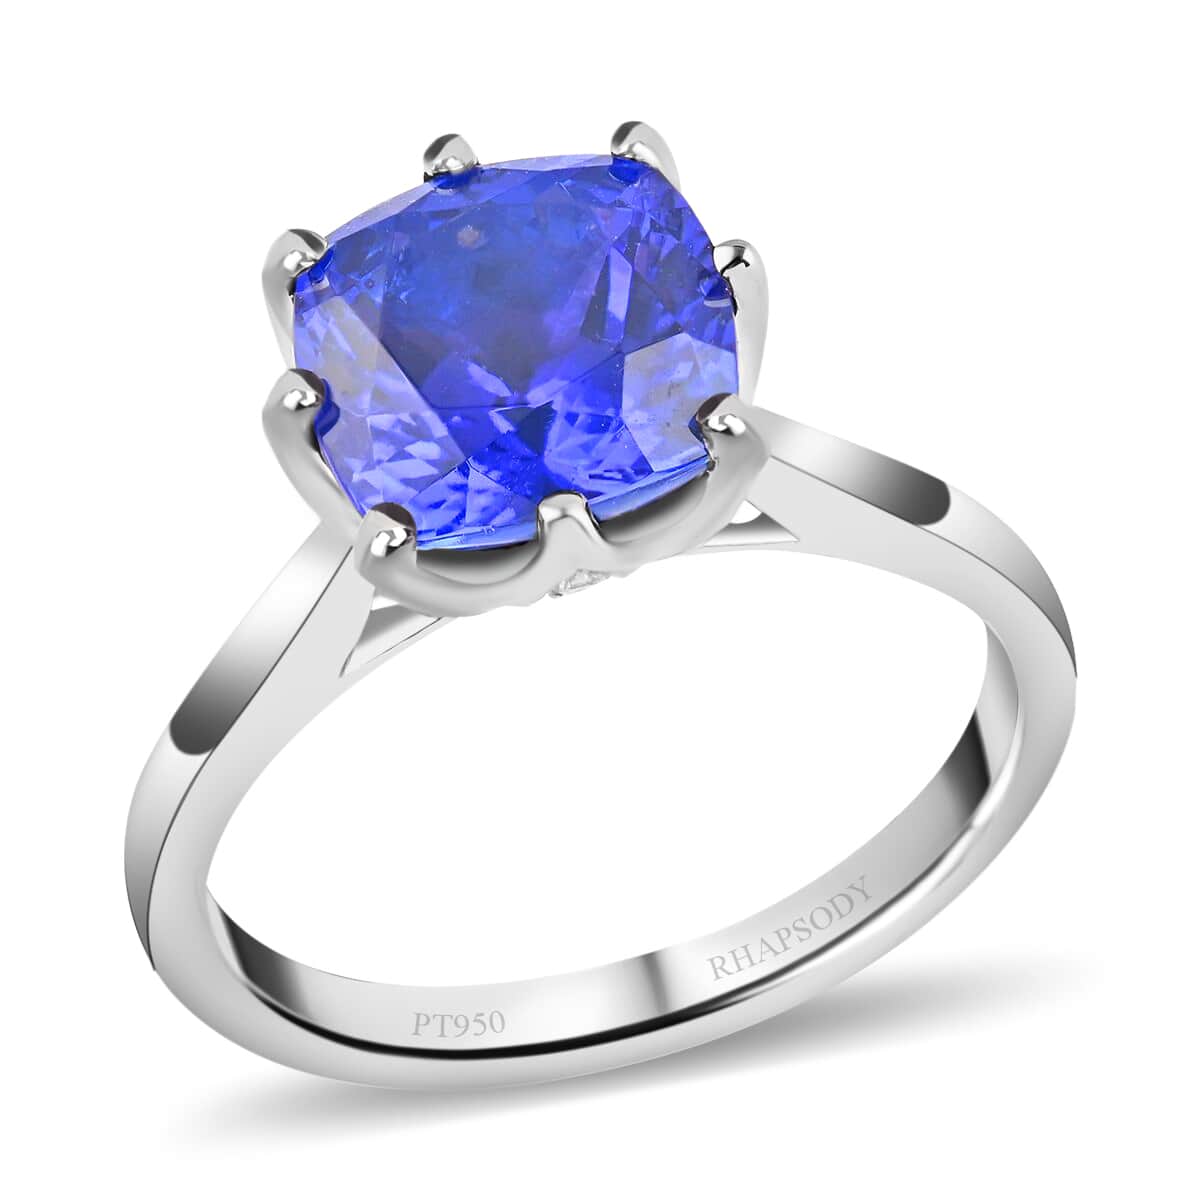 Doorbuster Certified and Appraised RHAPSODY 950 Platinum AAAA Tanzanite, Diamond (E-F, VS) Ring (6.43 g) 3.40 ctw image number 0